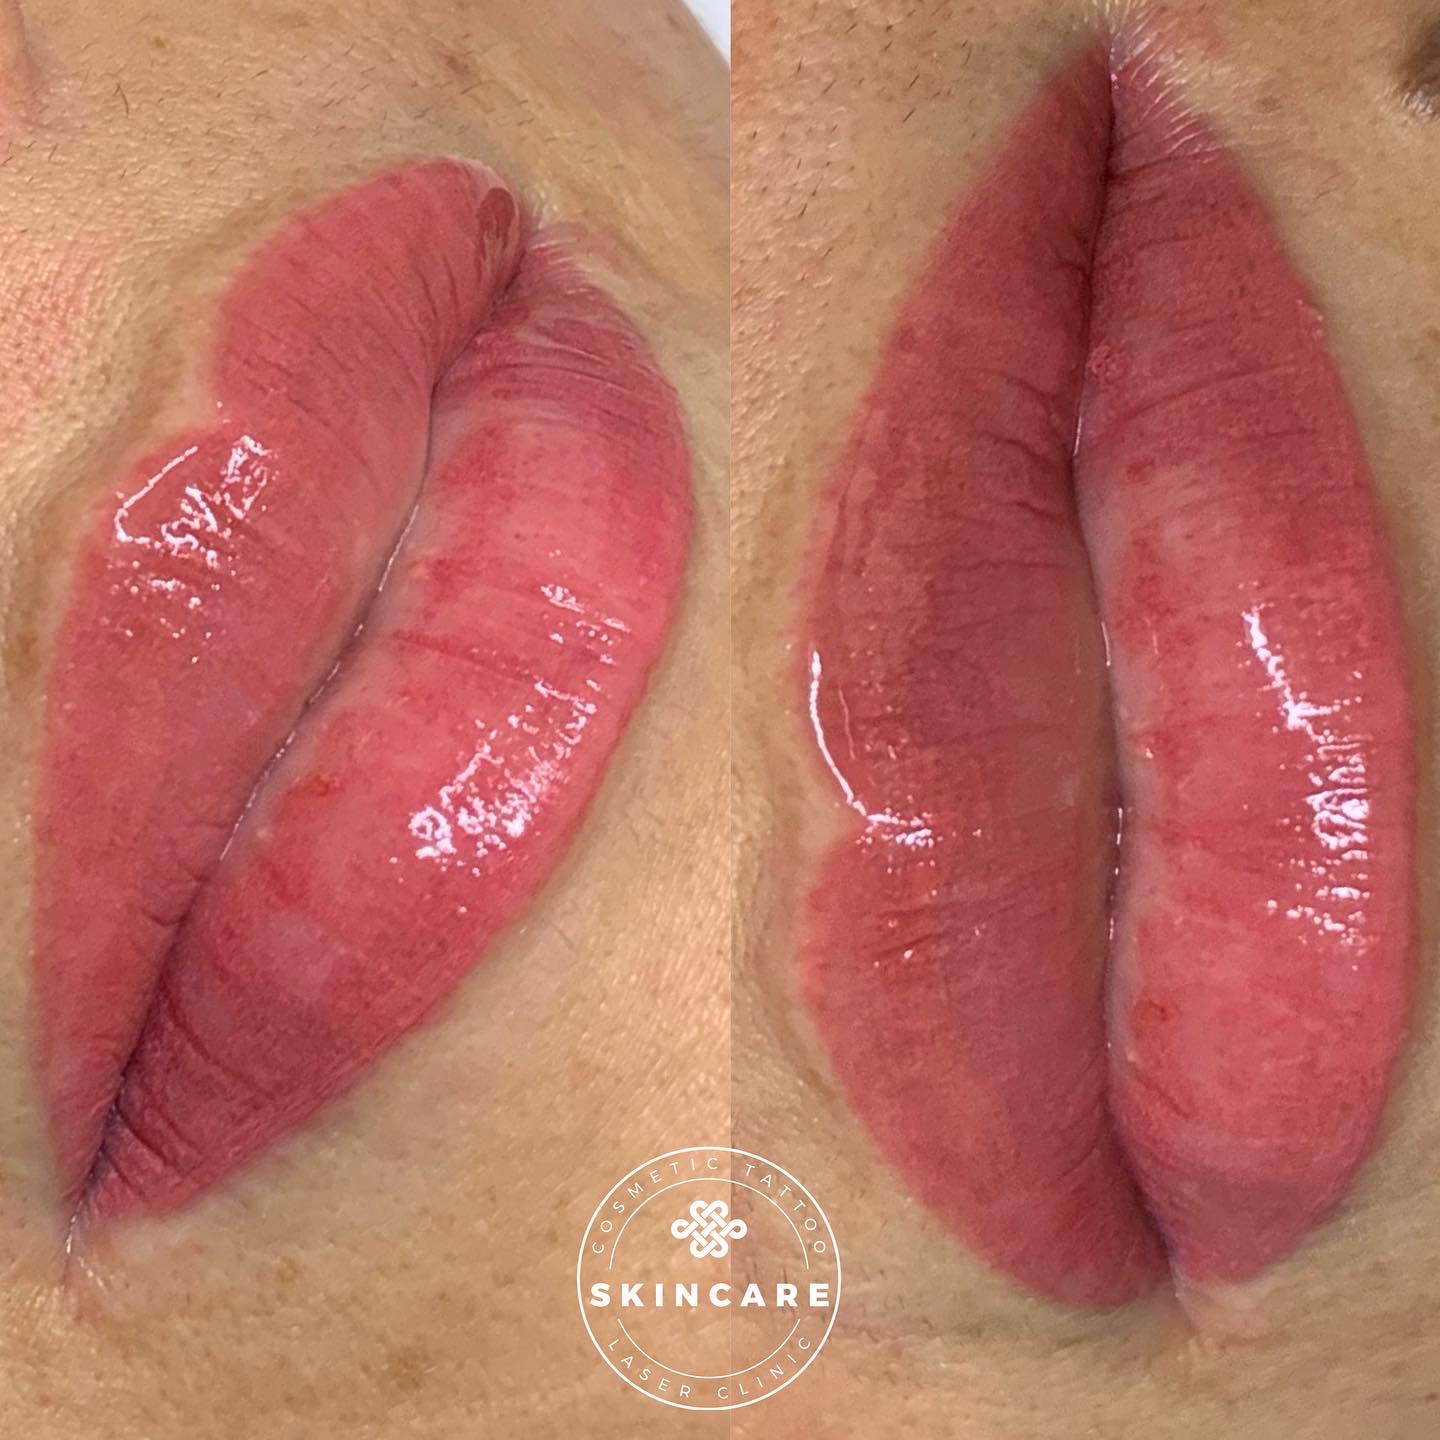 Lip Blushing Review: Before & After Photos of My Lip Color Tattoo